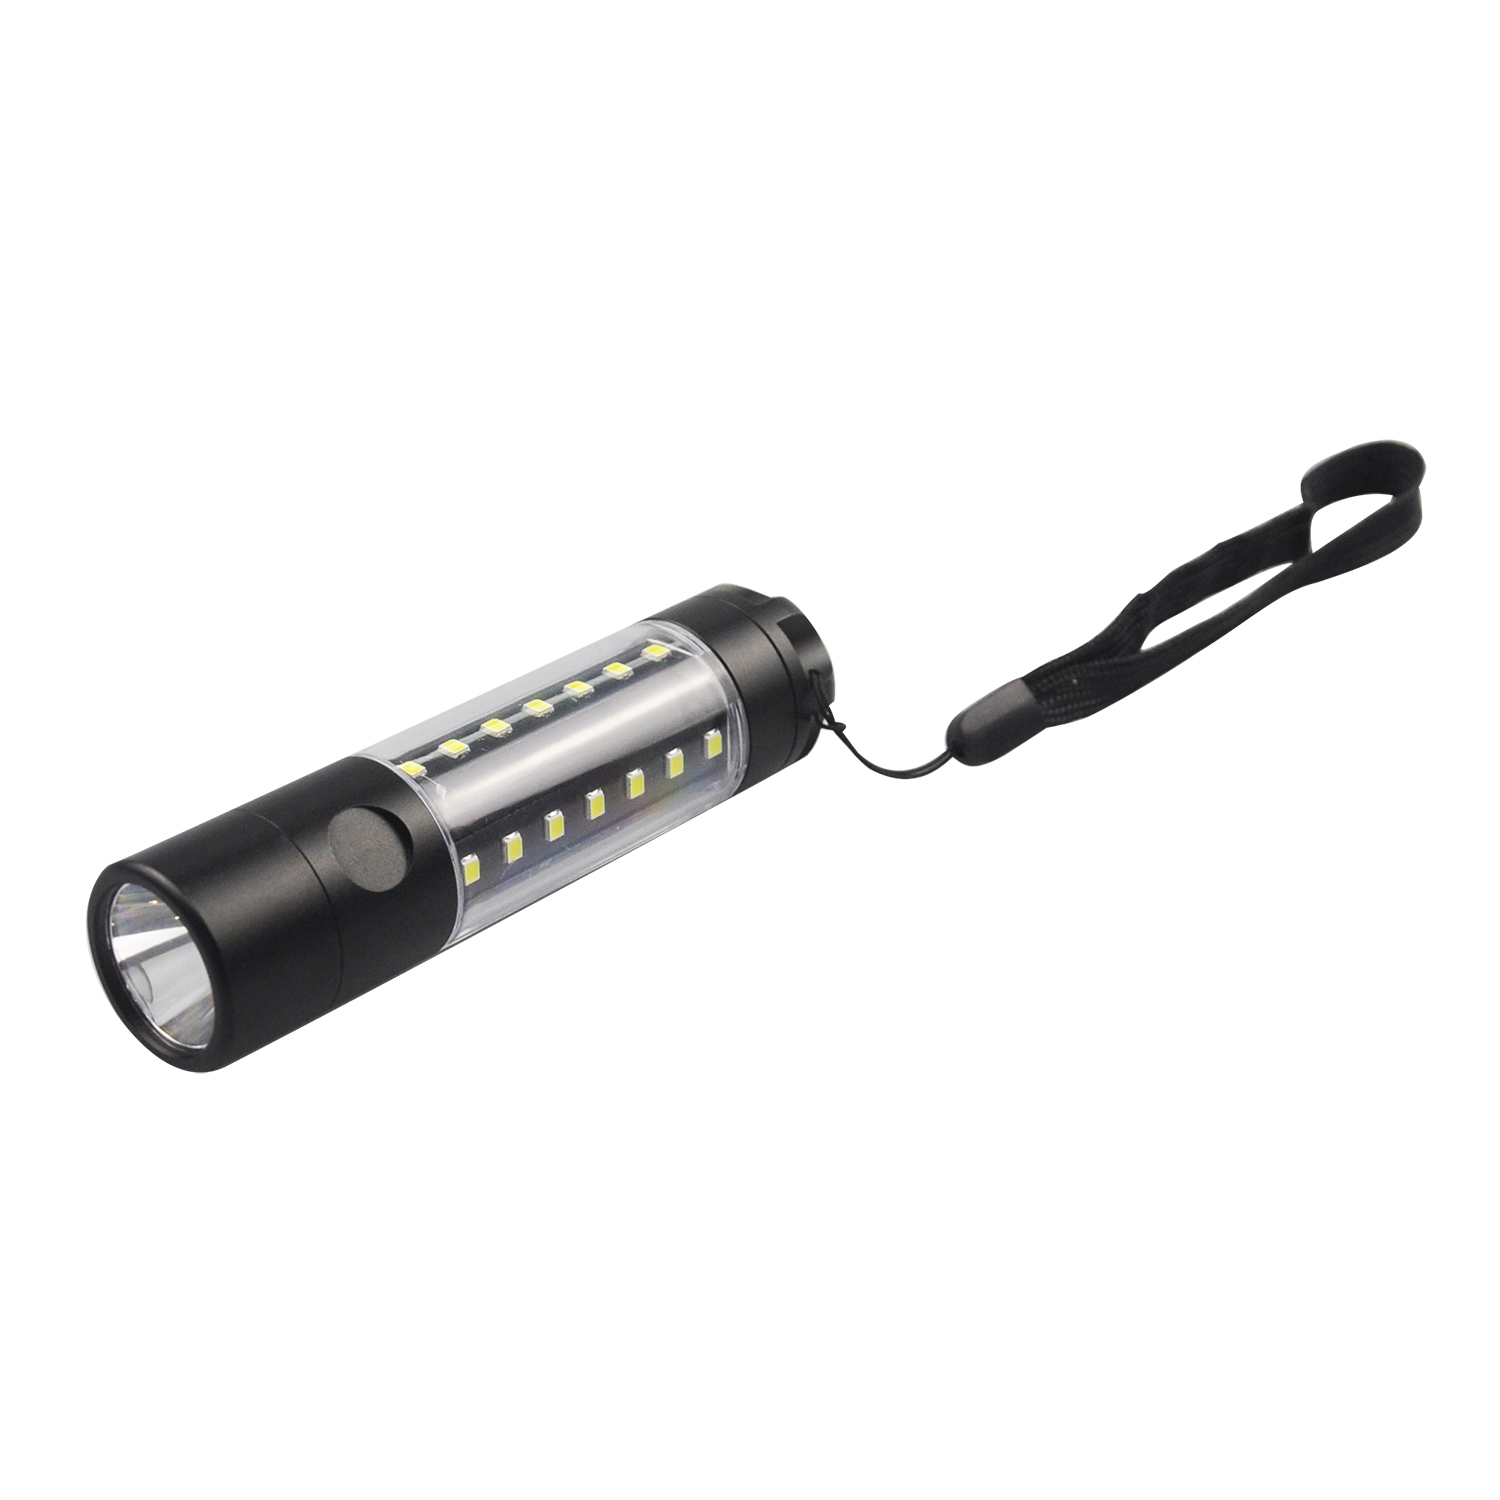 SMD LED Black Battery Emergency Torch Flashlight with String